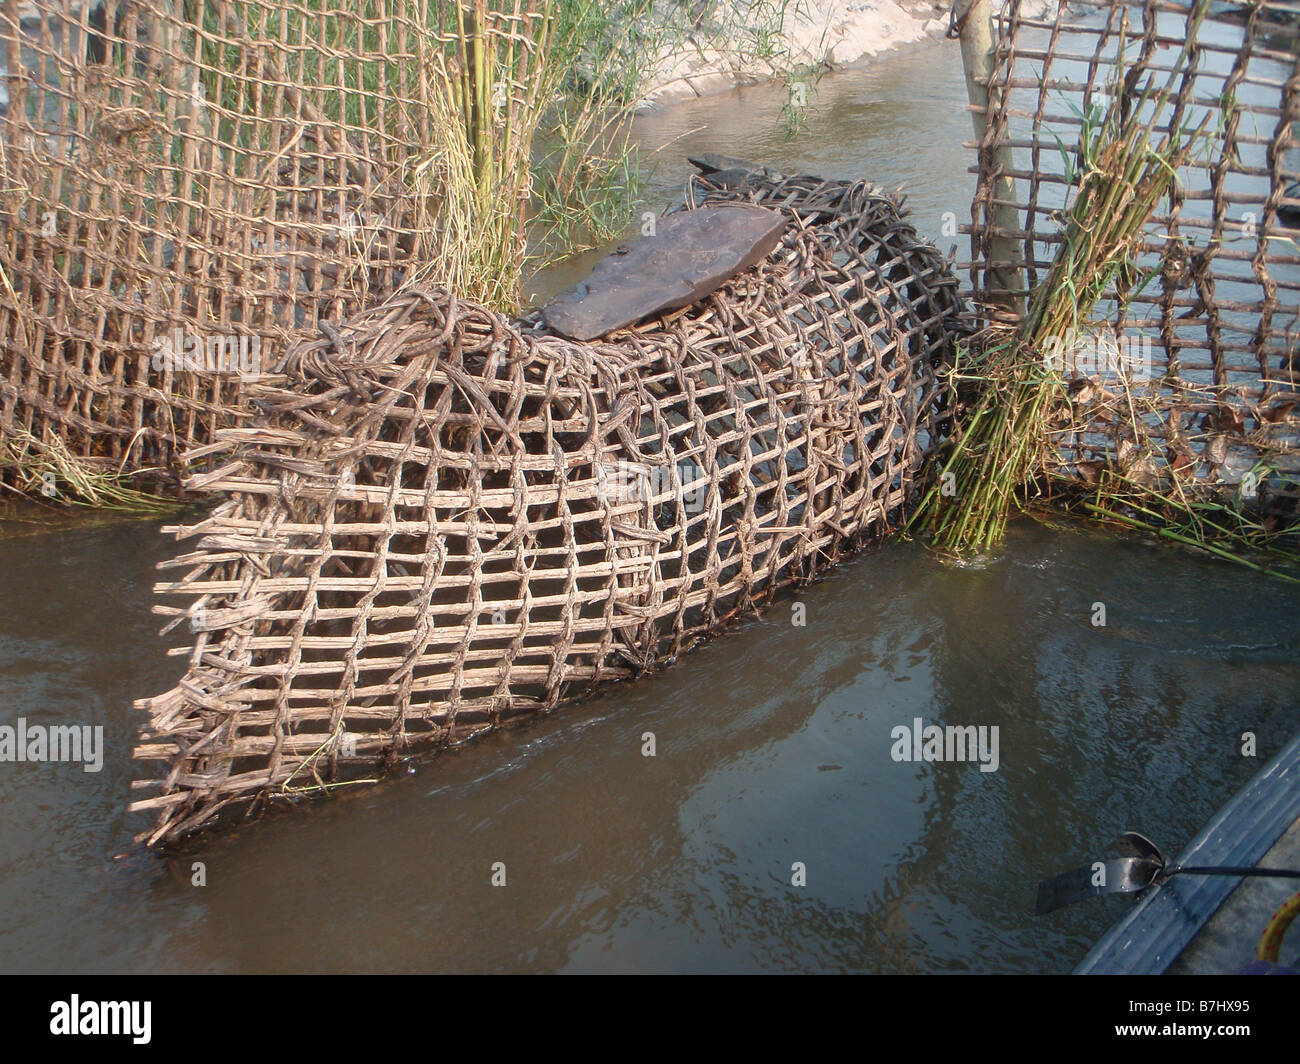 Conical fish traps of rattan palm leaves and wood in bank of Lualaba River  Democratic Republic of Congo Stock Photo - Alamy